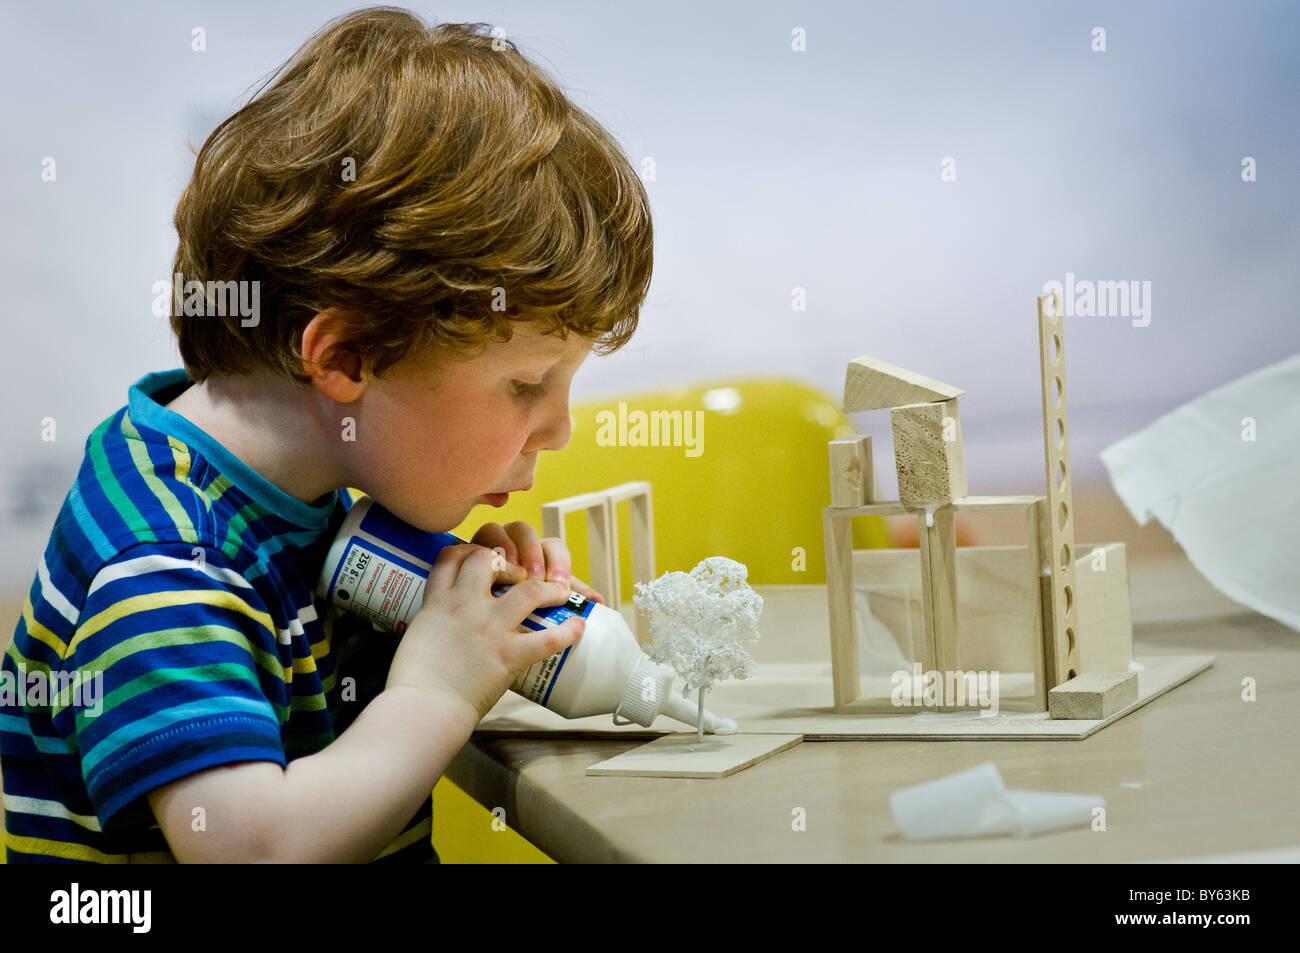 A young boy sticking a model he has made. Stock Photo